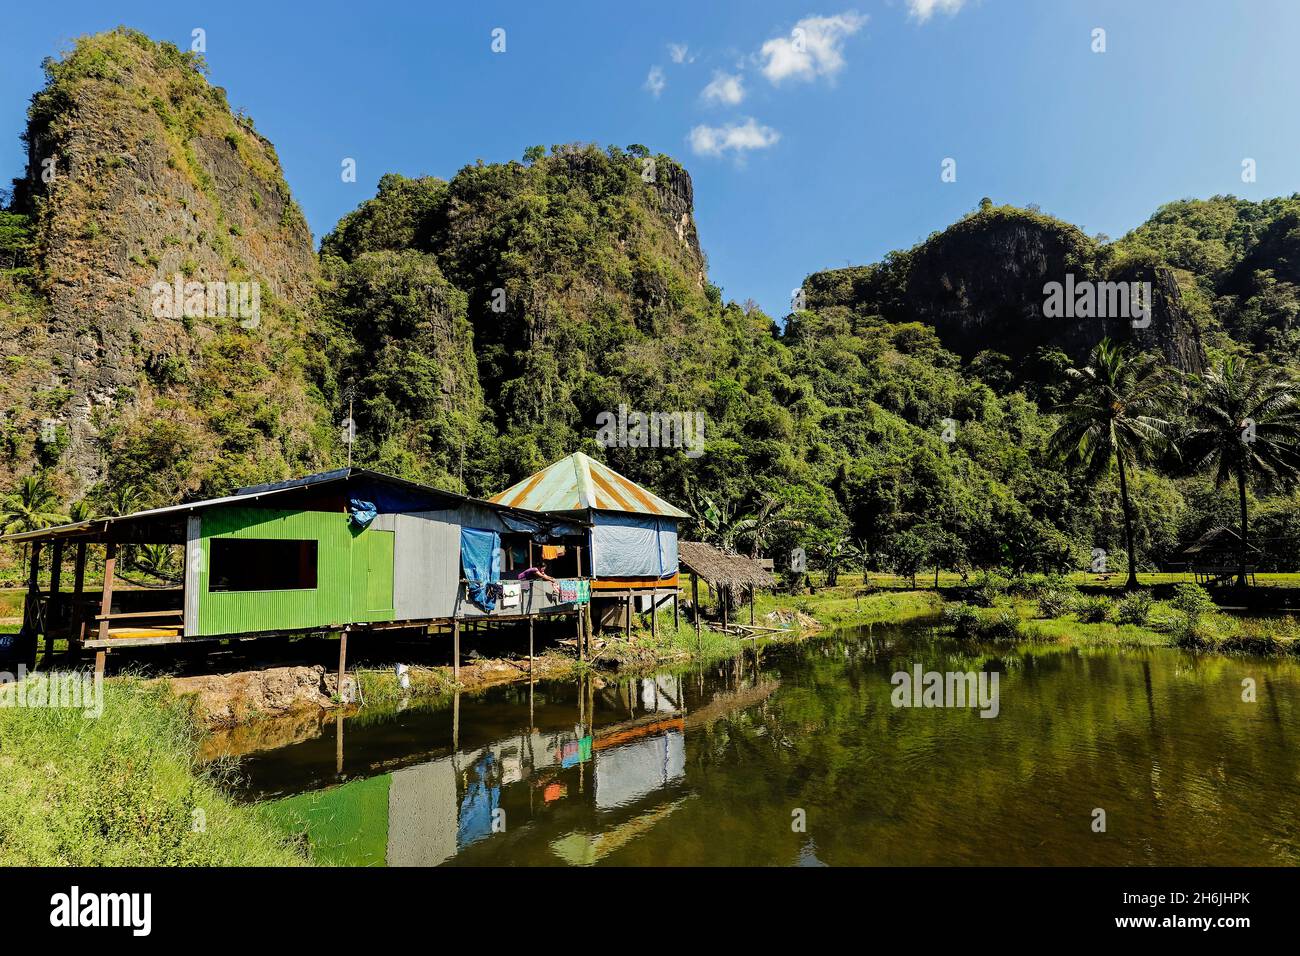 Fish pond and limestone outcrops at Rammang village, karst region, Rammang-Rammang, Maros, South Sulawesi, Indonesia, Southeast Asia, Asia Stock Photo